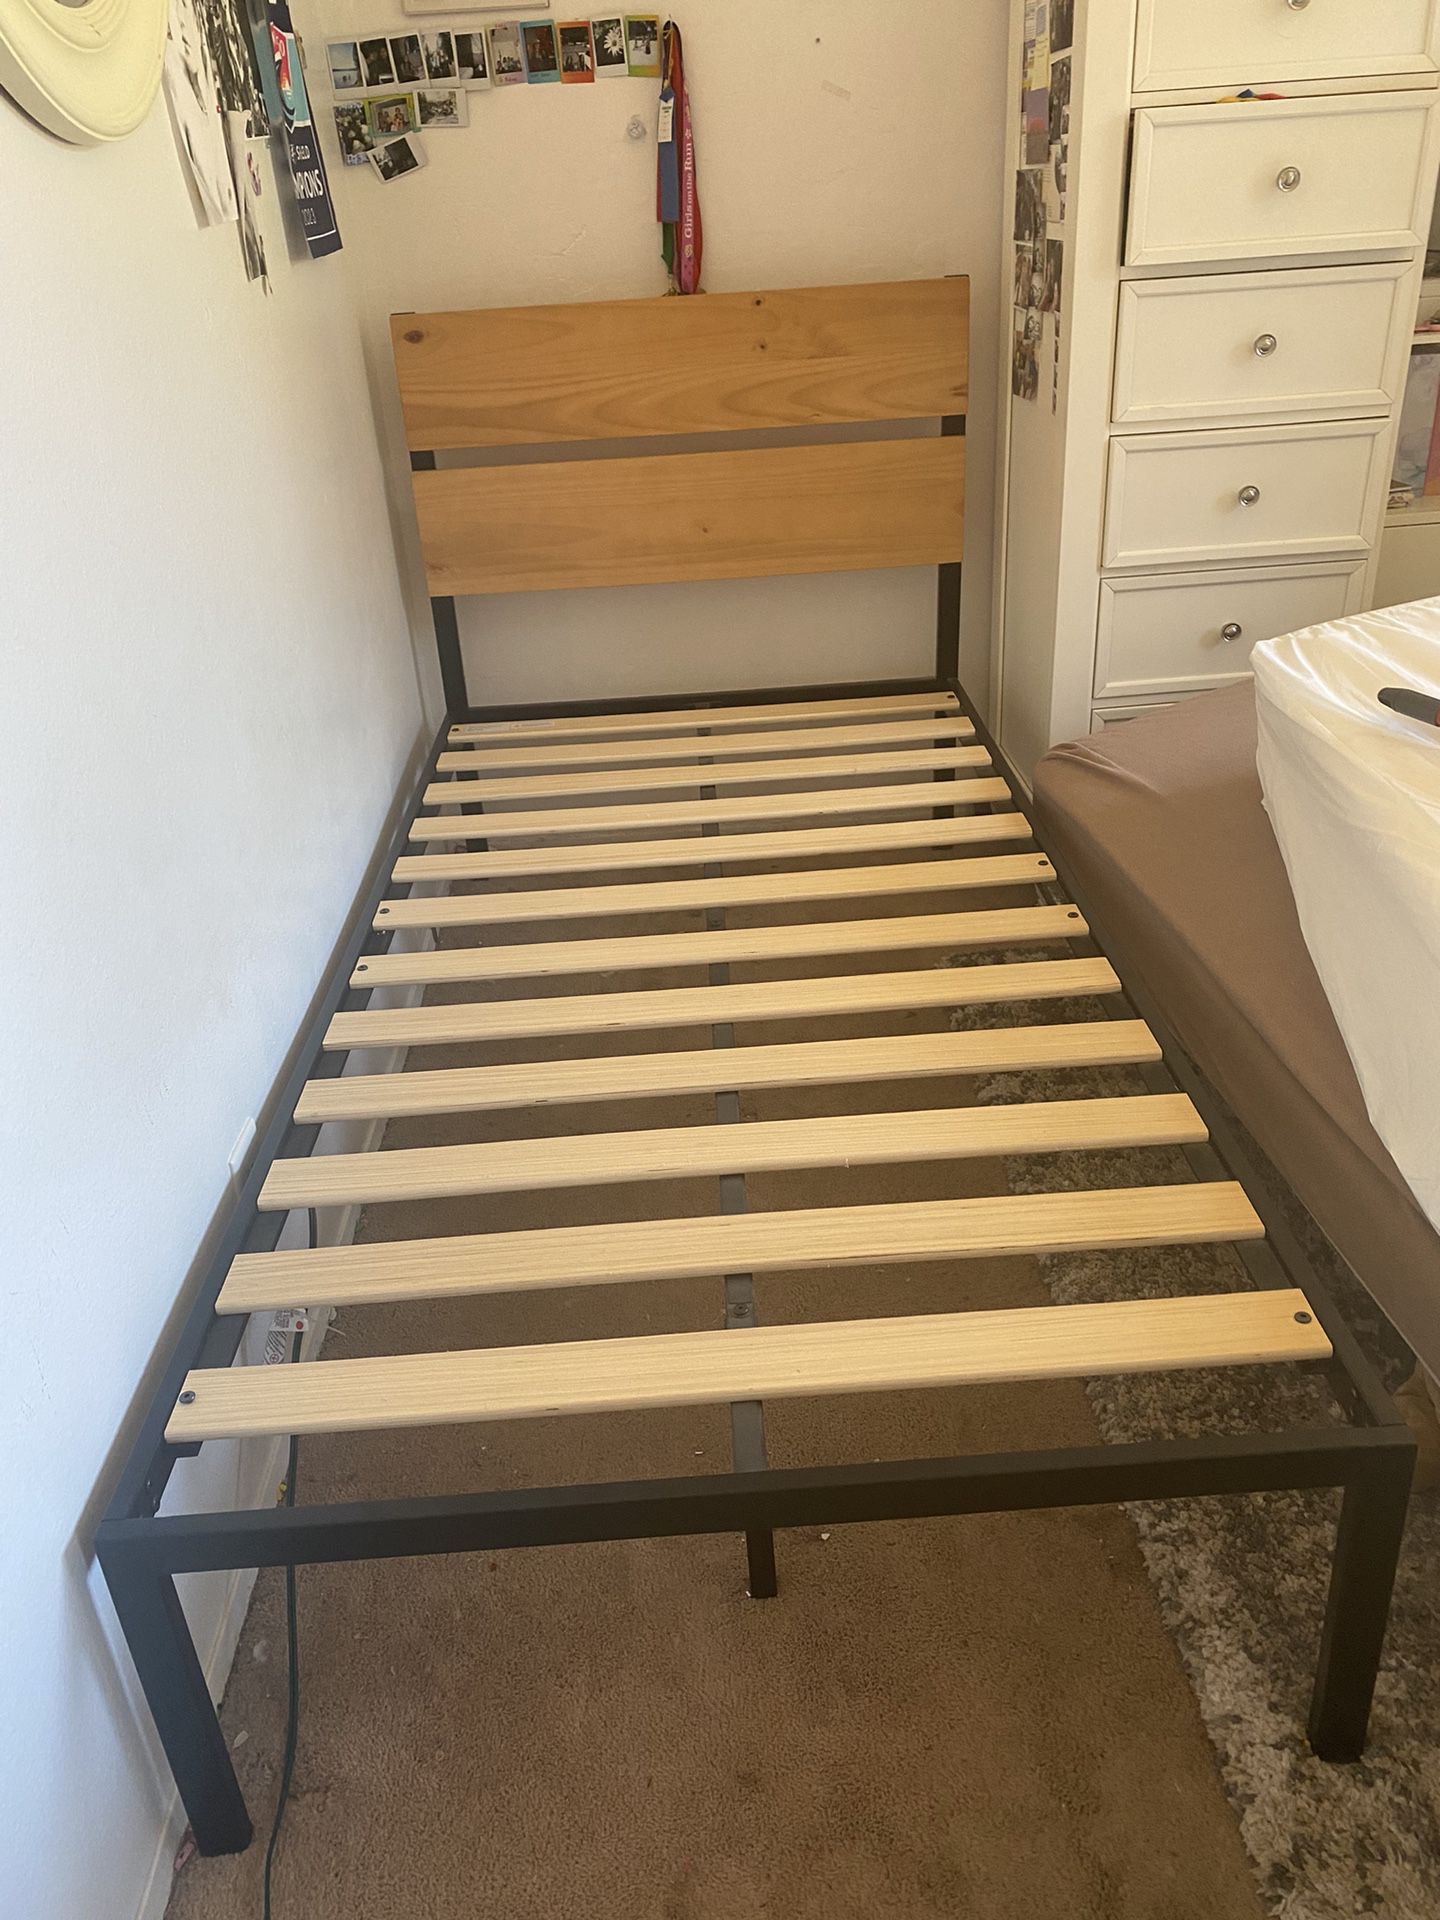 Two twin bed frames with mattress set